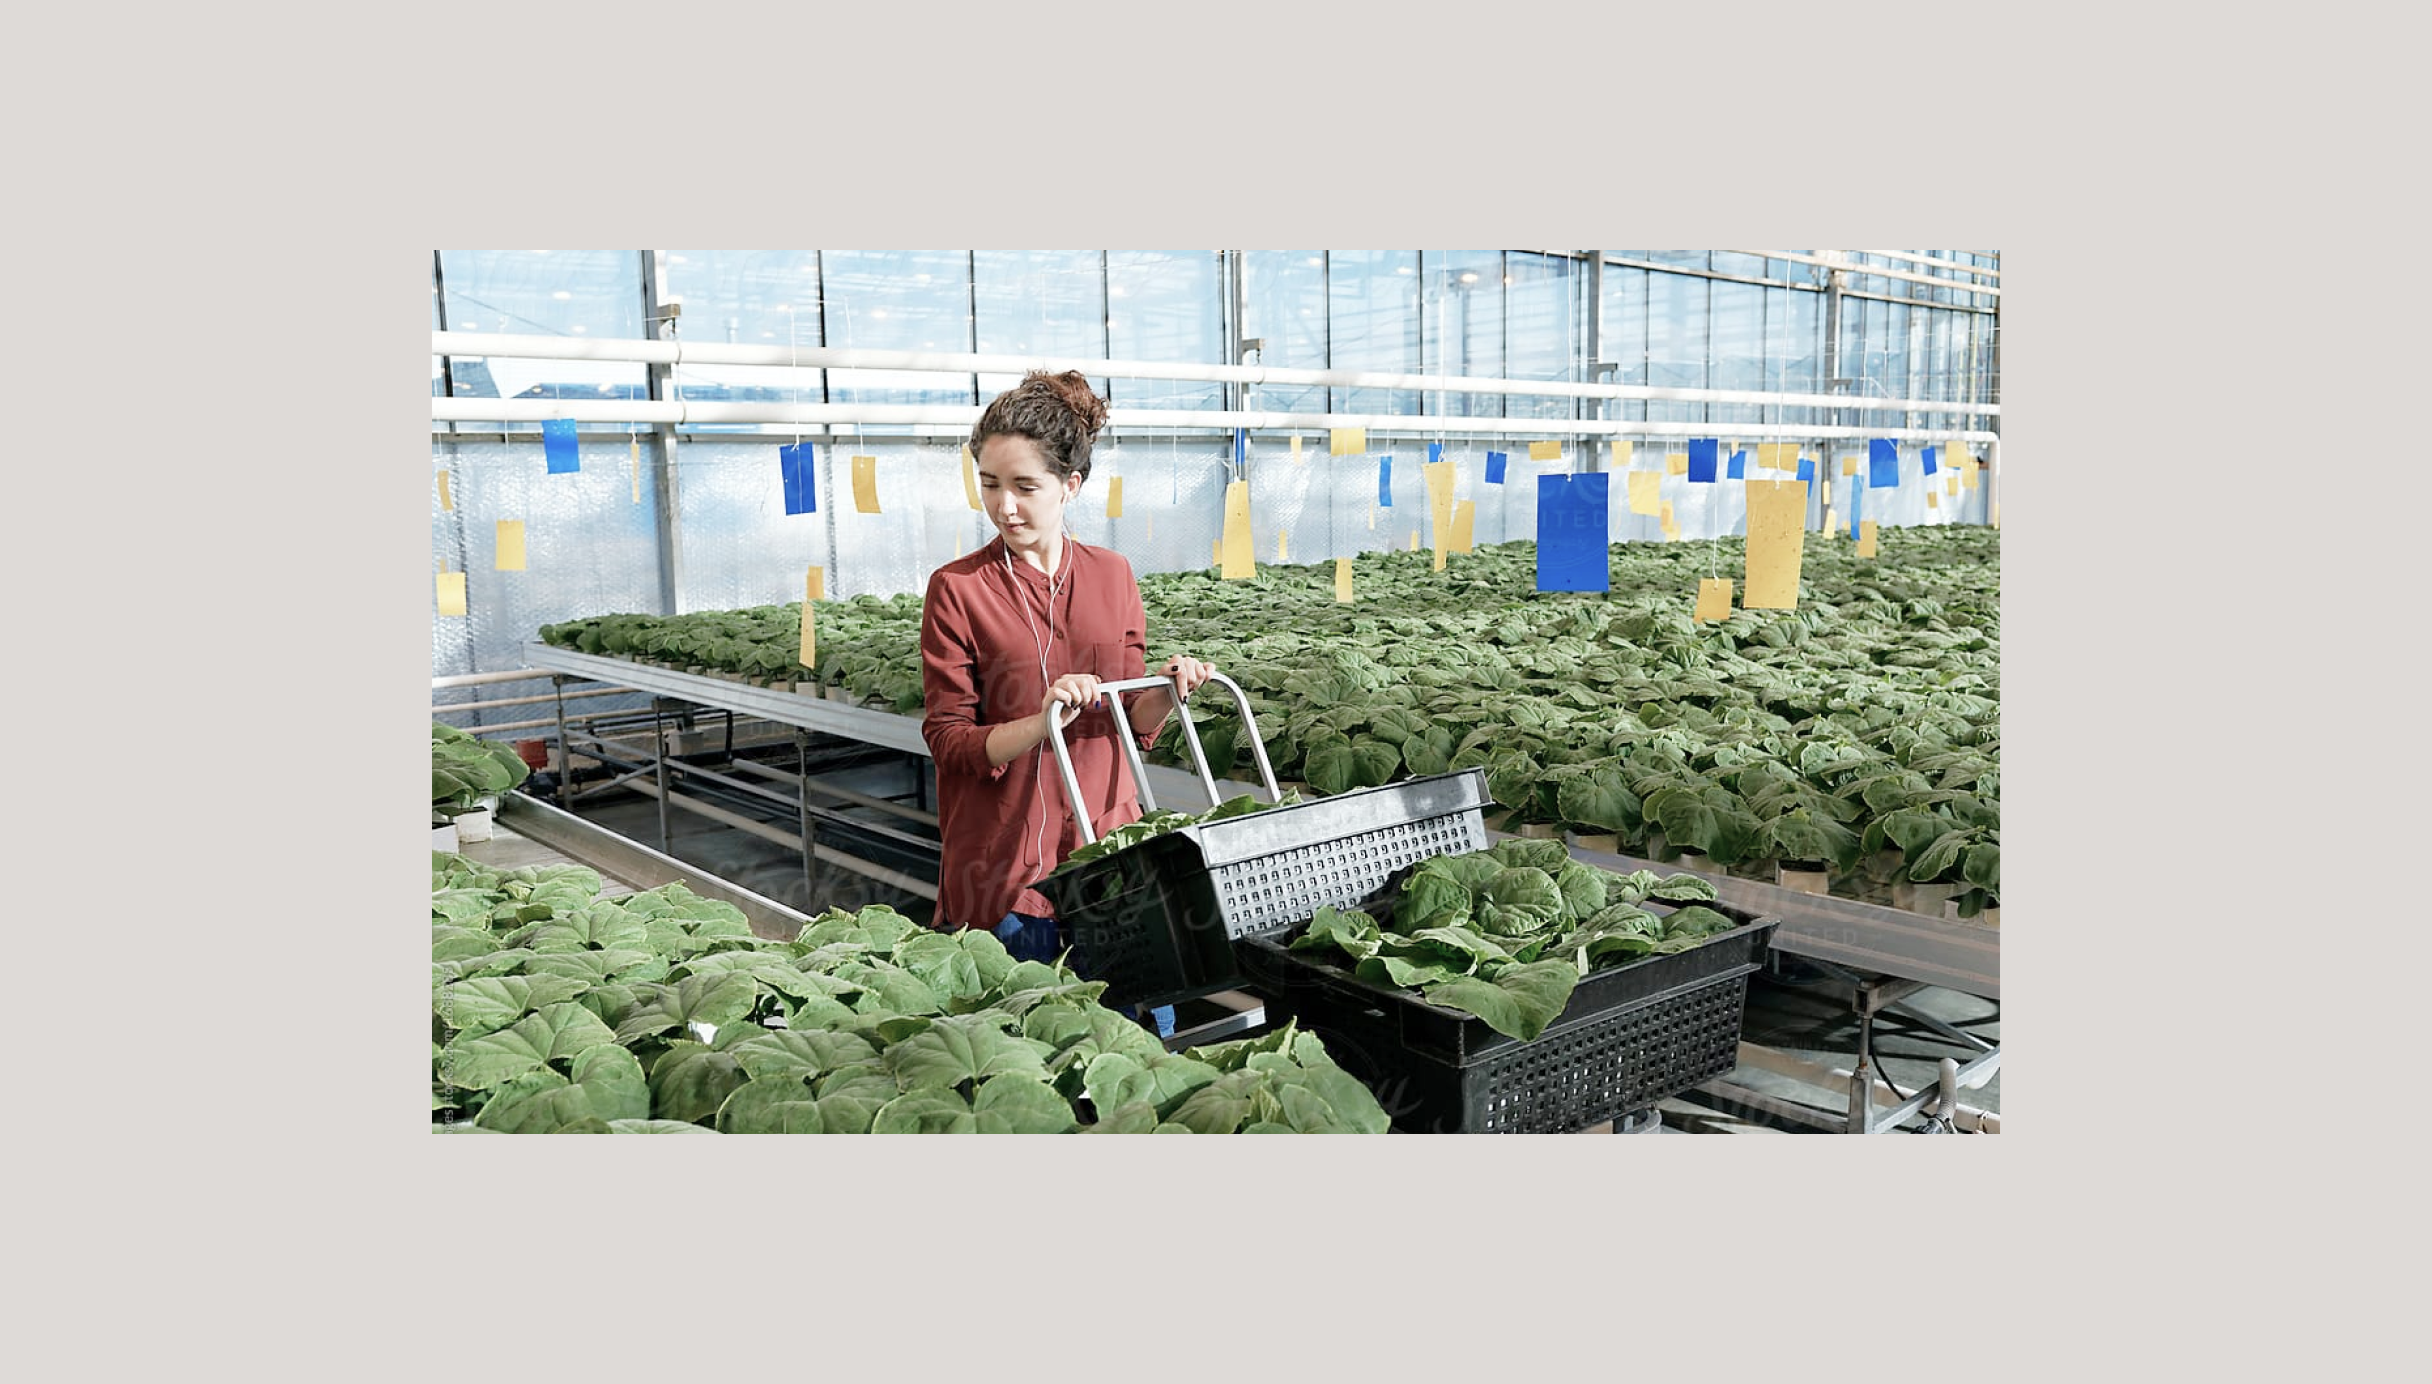 A woman picking fresh produce in a greenhouse